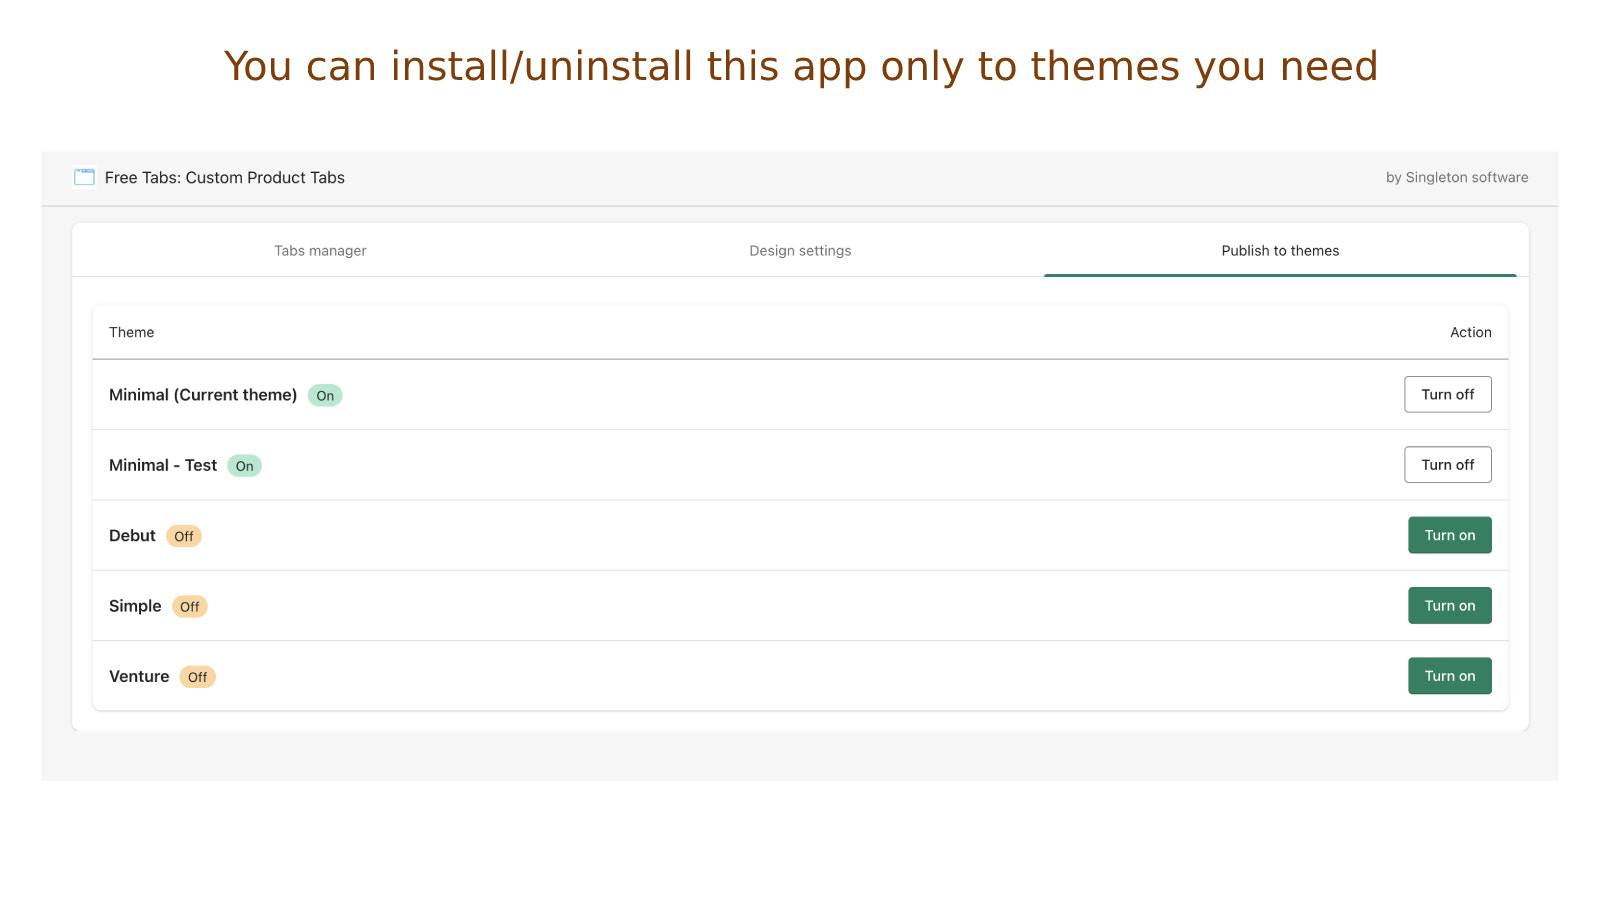 You can install/uninstall app only to themes you need